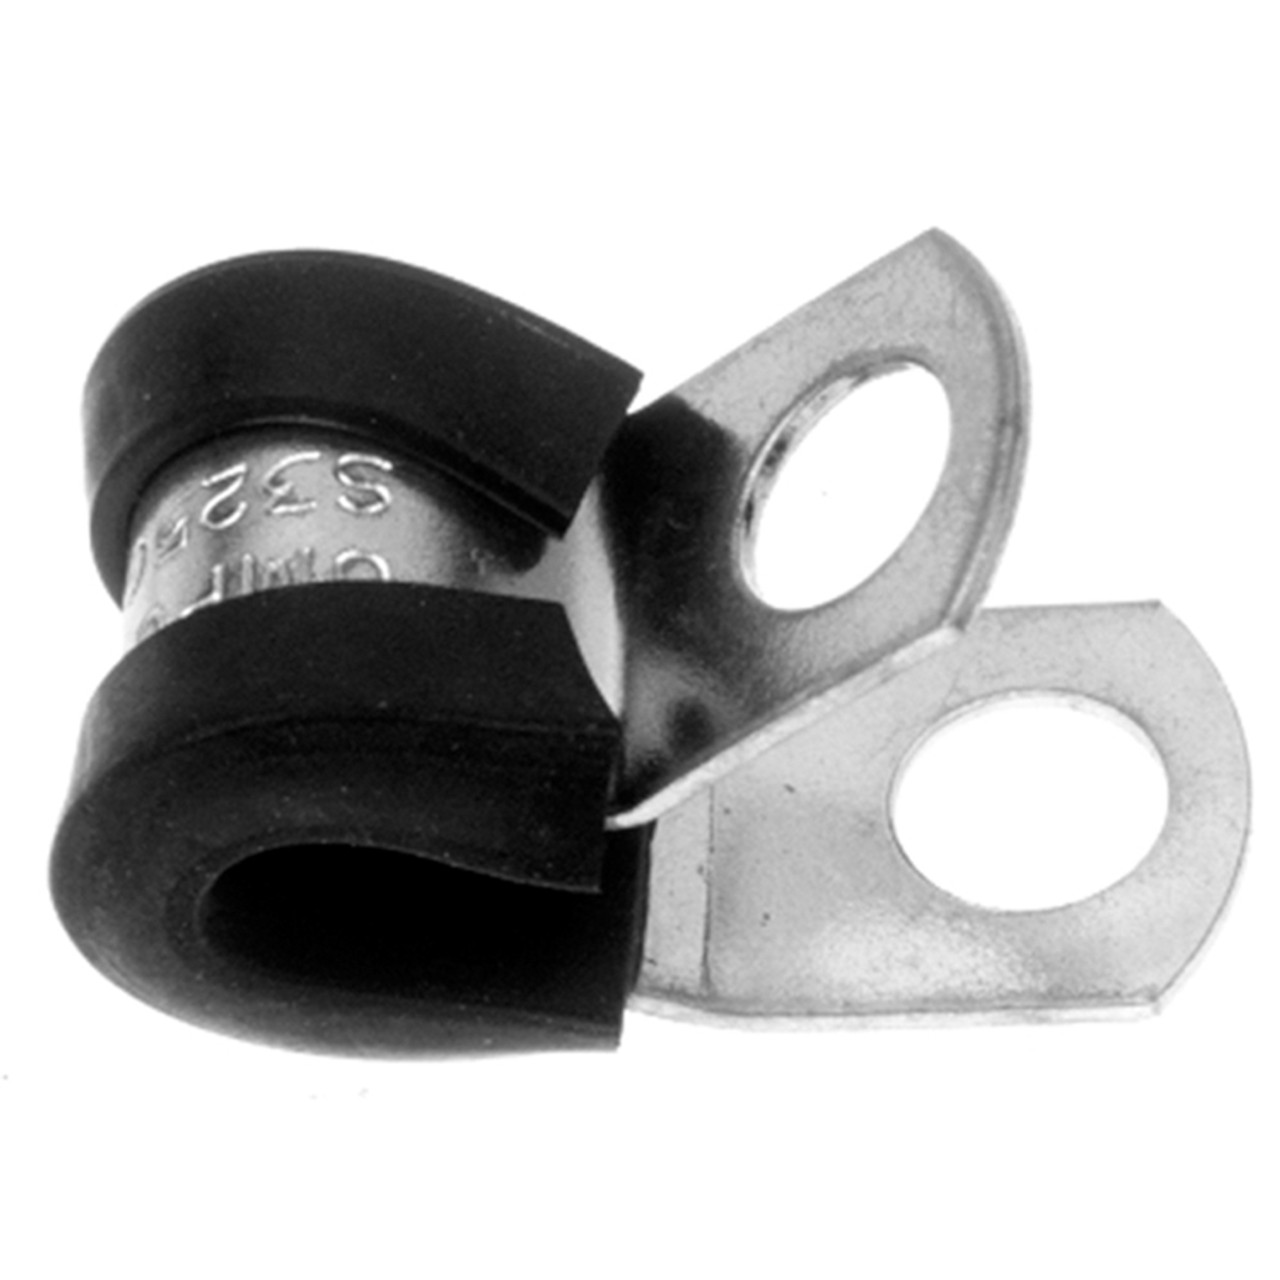 5/8" I.D. Plated Steel - Rubber Cushioned Tube Strap - 1/4" Bolt Hole  G6N-10